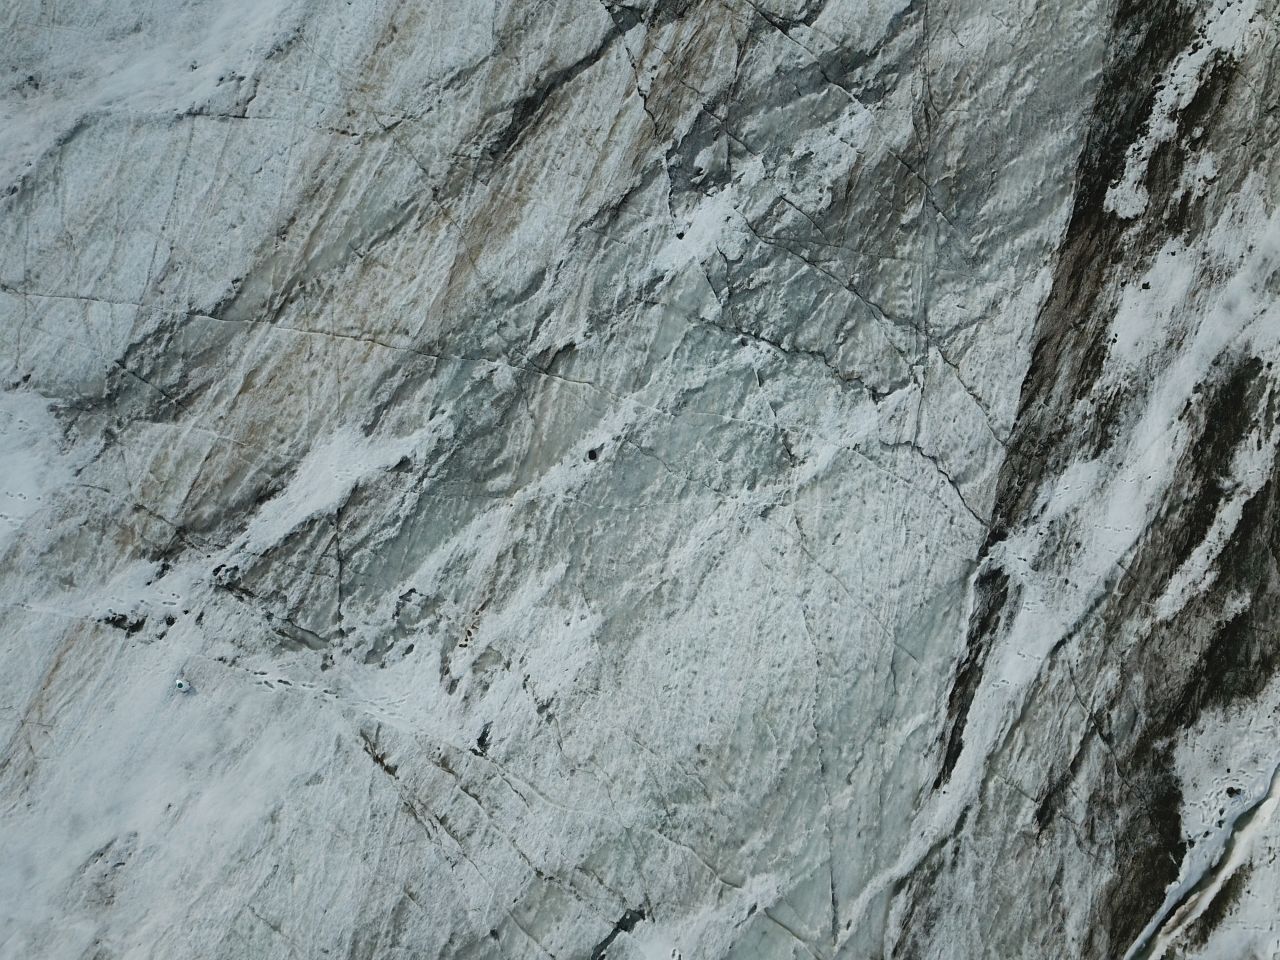 From above, Cook's image of Svalbard's Foxfonna Glacier shows the surface ravaged by crevasses, patches of rotten snow, bare ice and patches of dust and algae. 